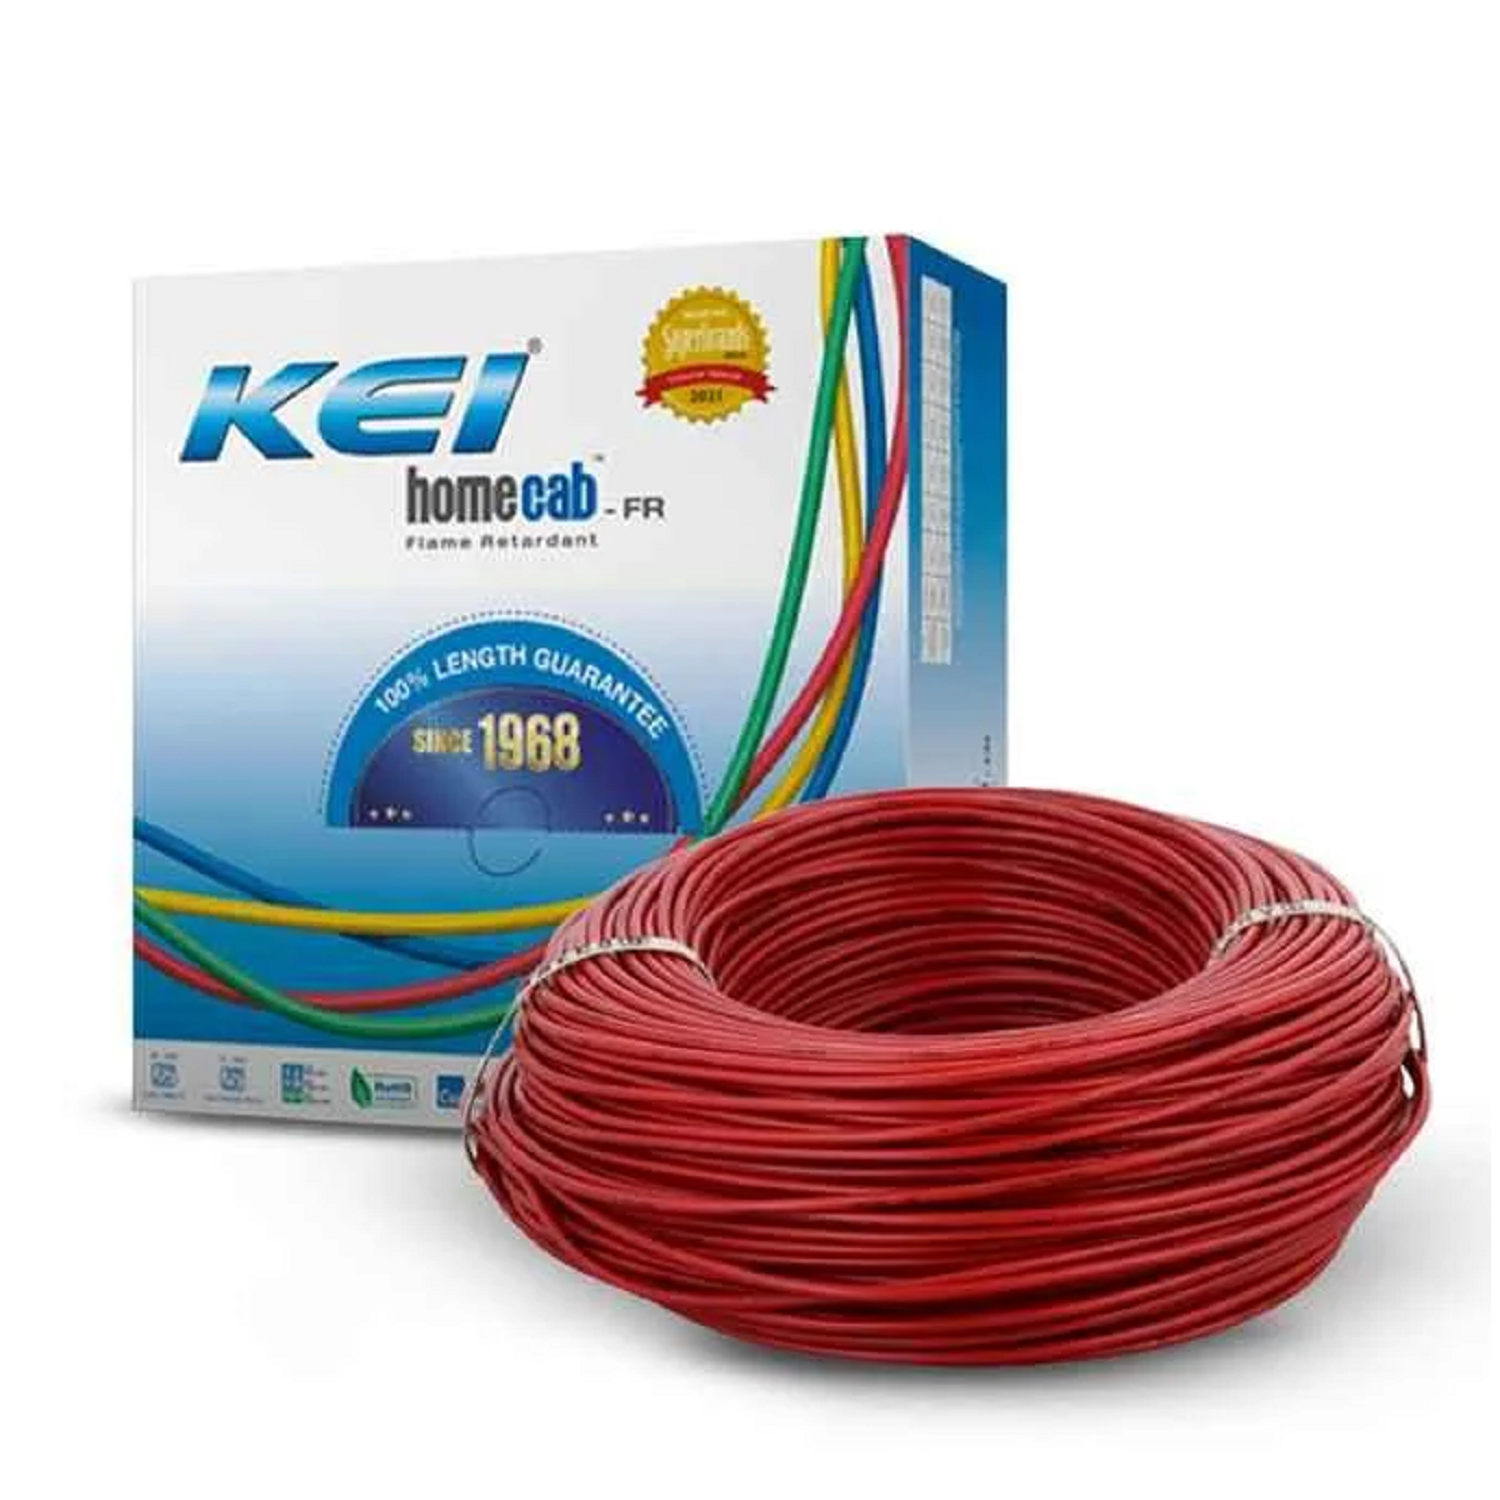 6.0 Sqmm KEI FR Single Core Copper Wire (90 Mtr) With PVC Insulated for House & Industrial Uses (Red